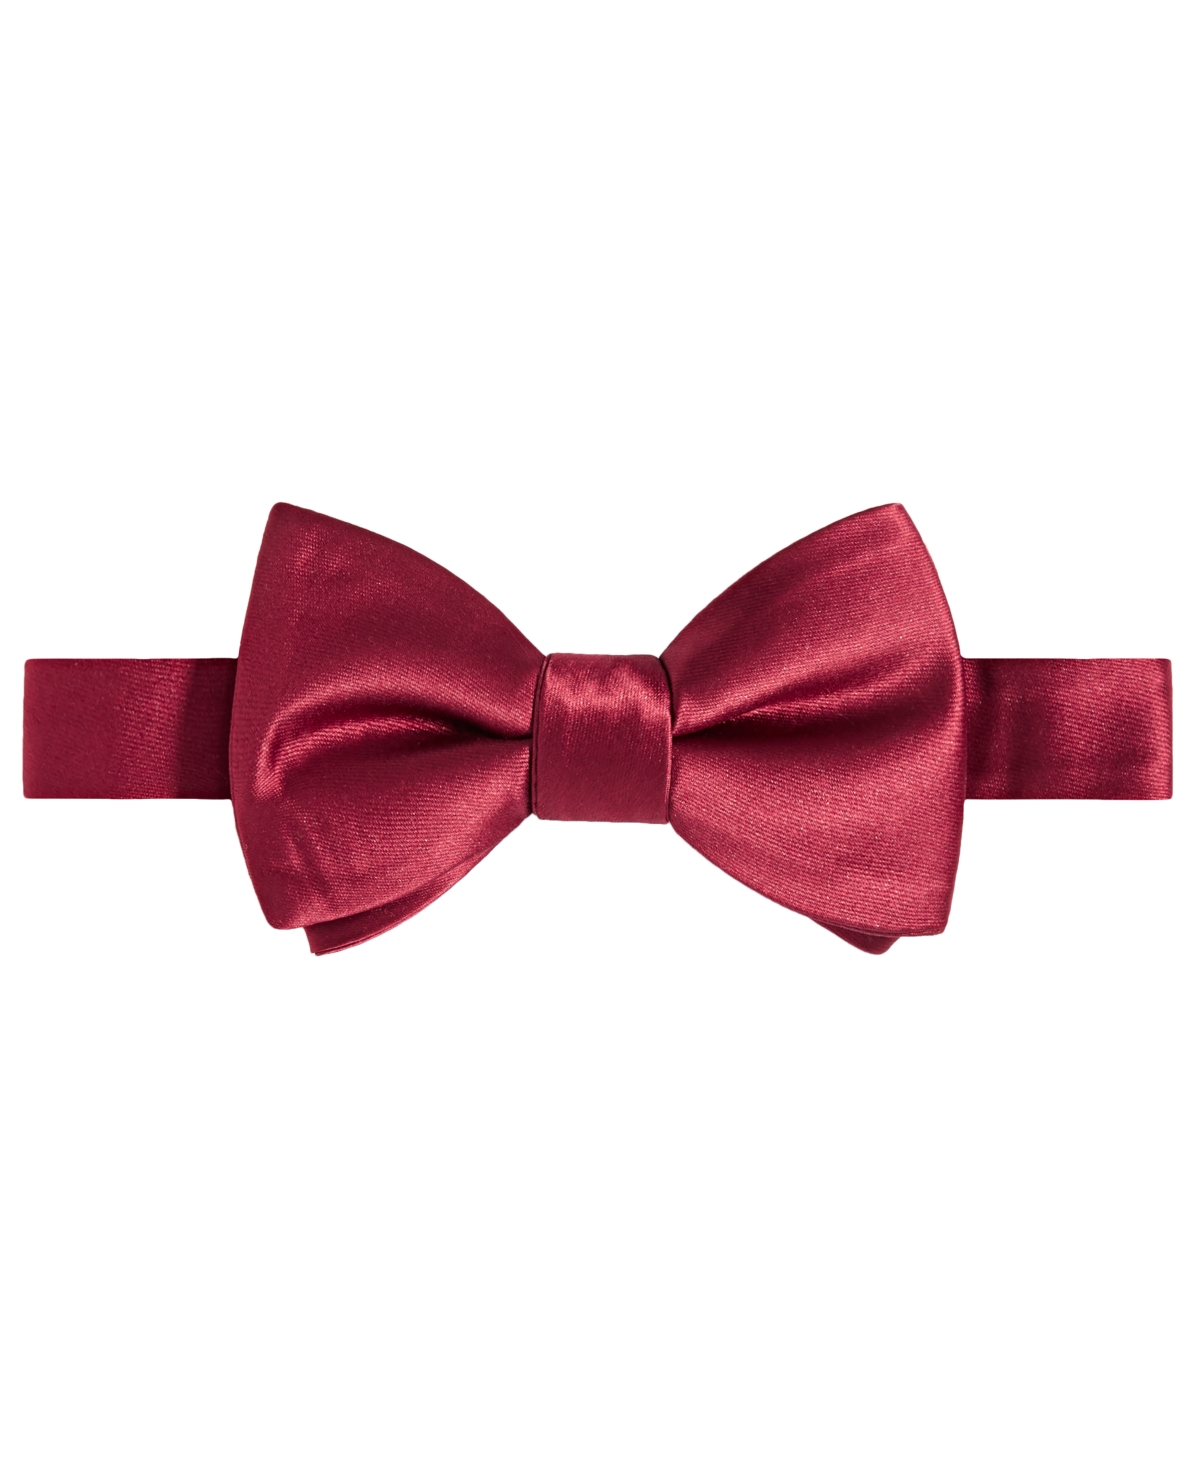 Tayion Collection Men's Crimson & Cream Solid Bow Tie In Red